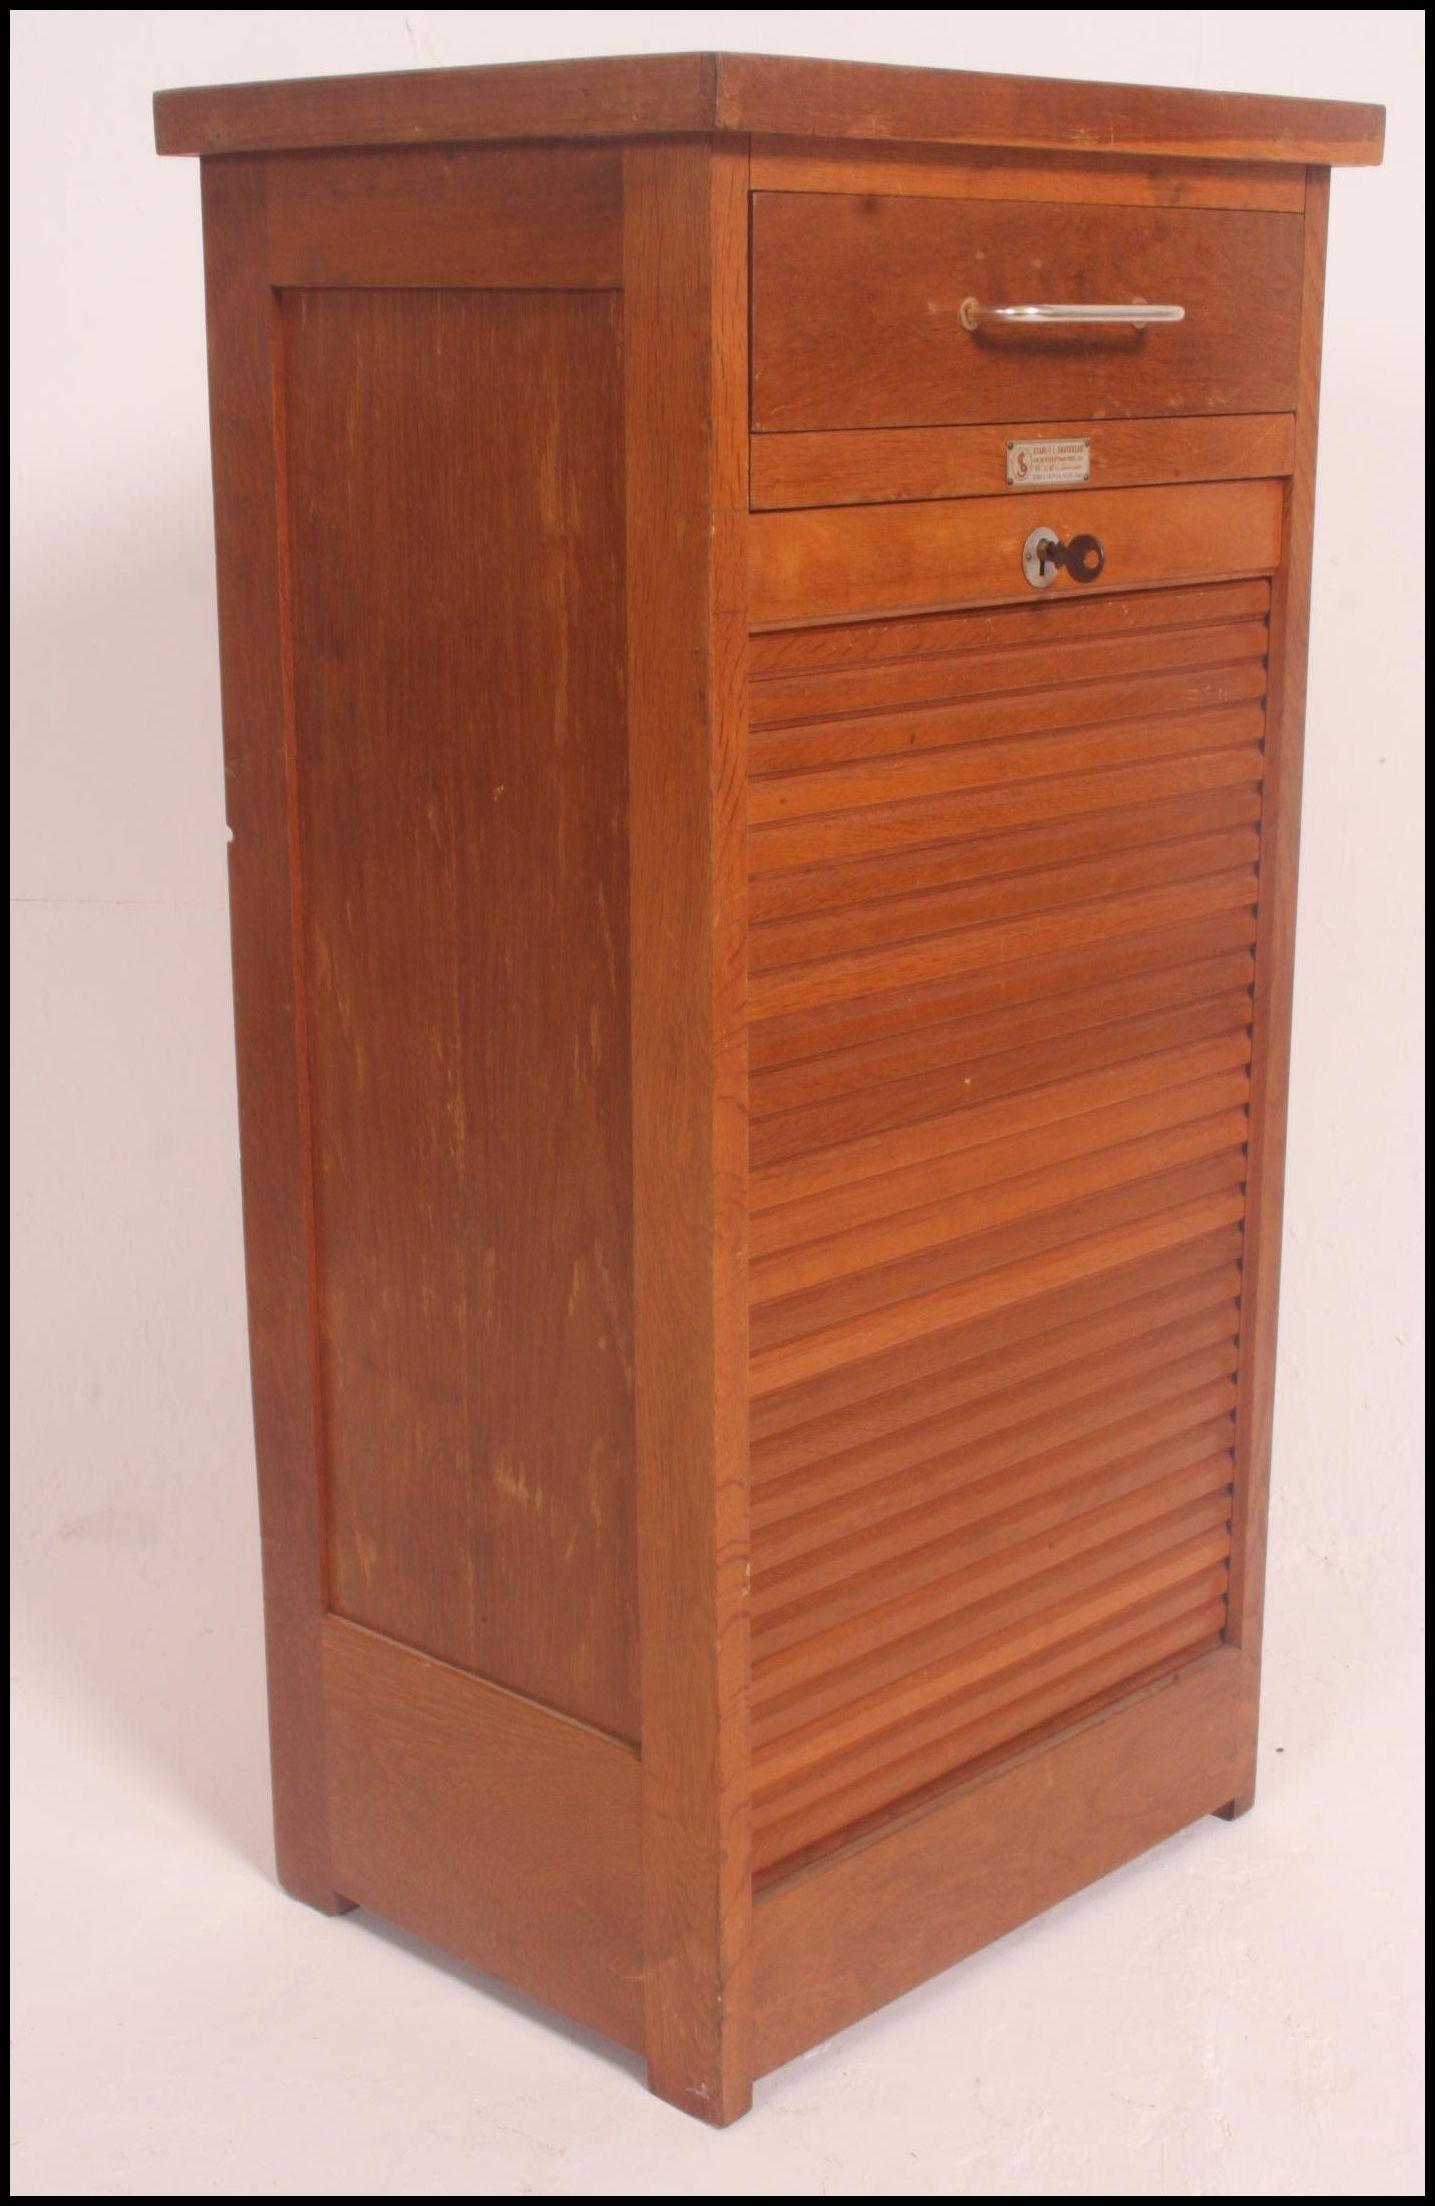 A 1940's /mid century oak Industrial office tambour filing cabinet system.